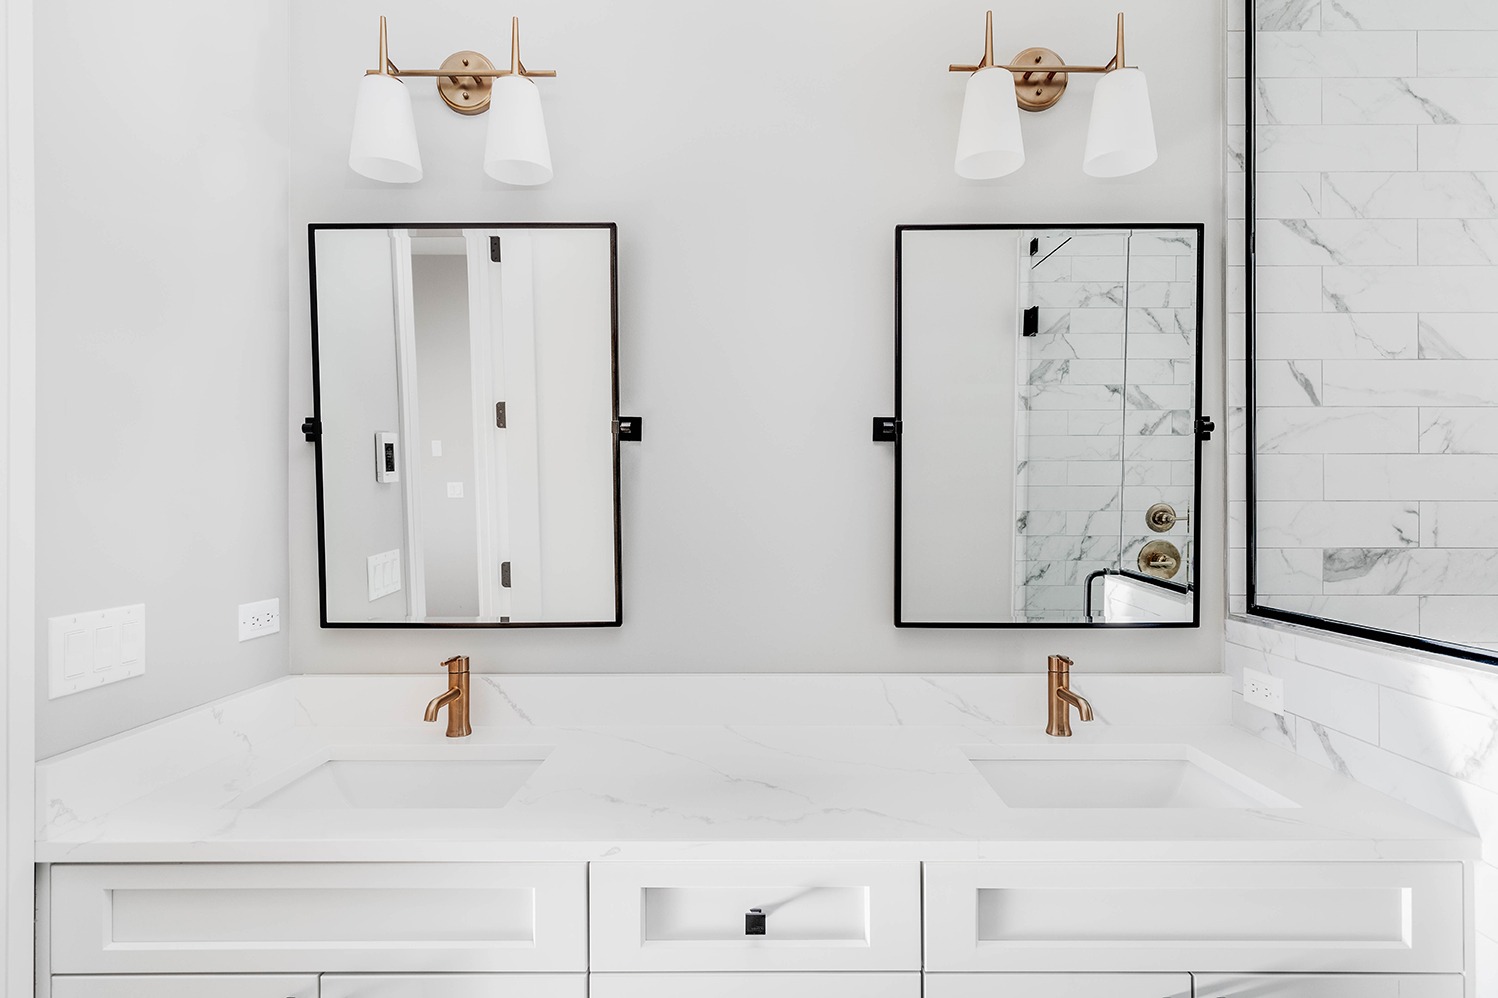 An all white bathroom with gold hardware and faucets in a downtown condo with the lights off.